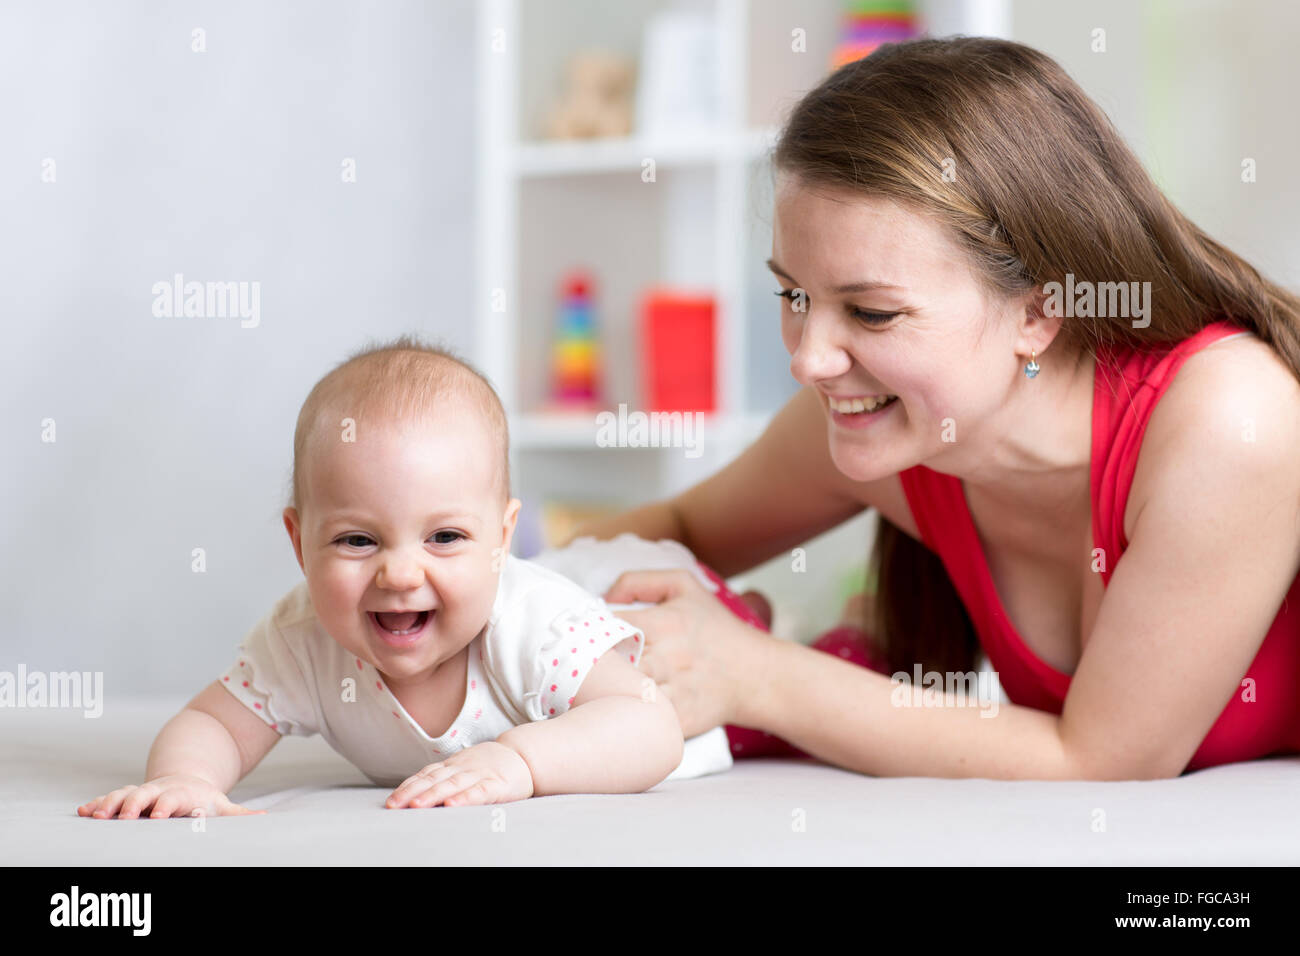 Happy cheerful family. Mother and baby playing, laughing and hugging Stock Photo